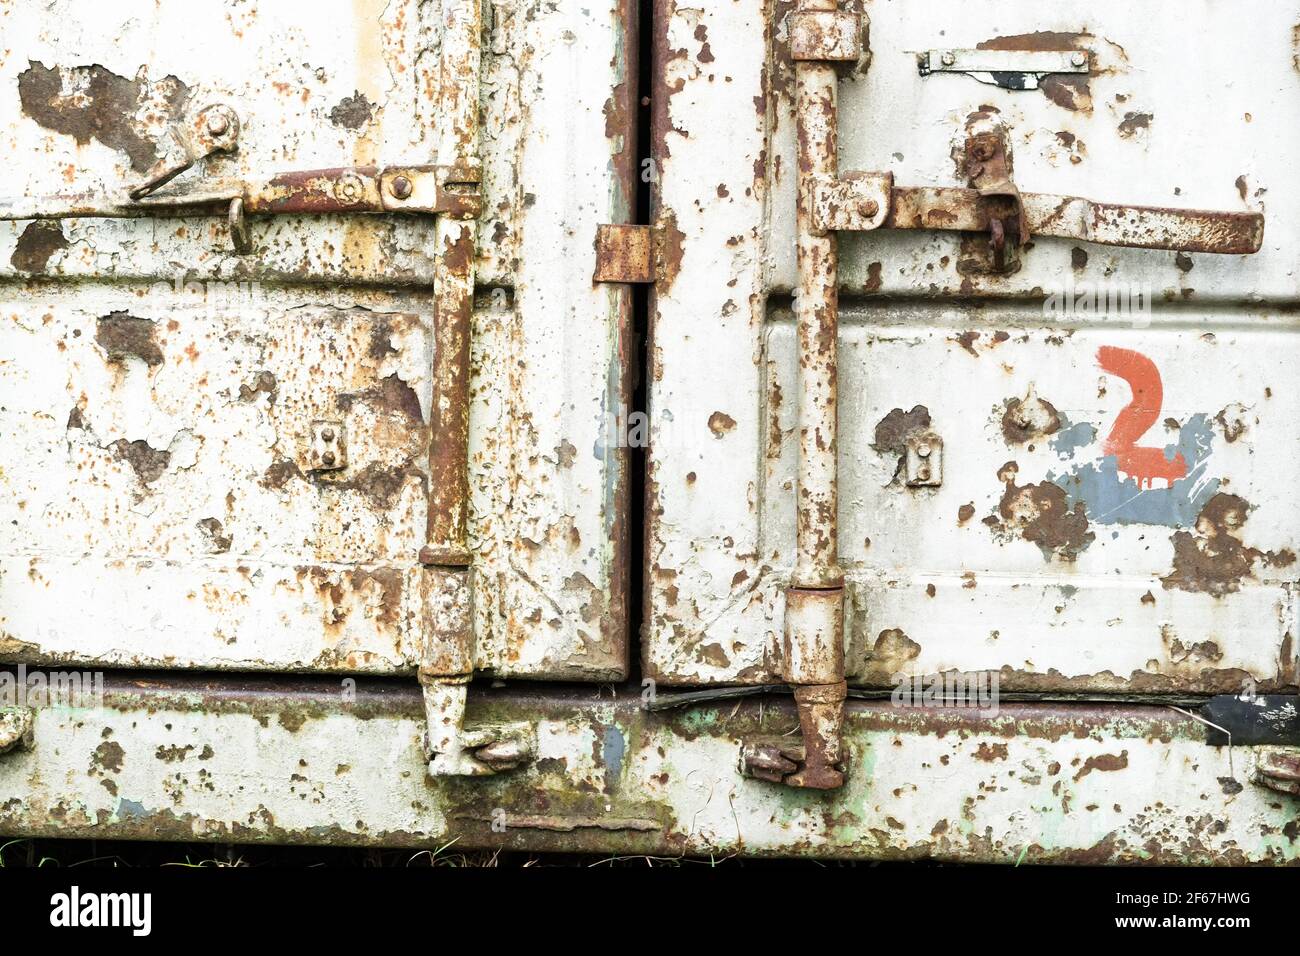 Old rusty shipping container locking system closeup Stock Photo